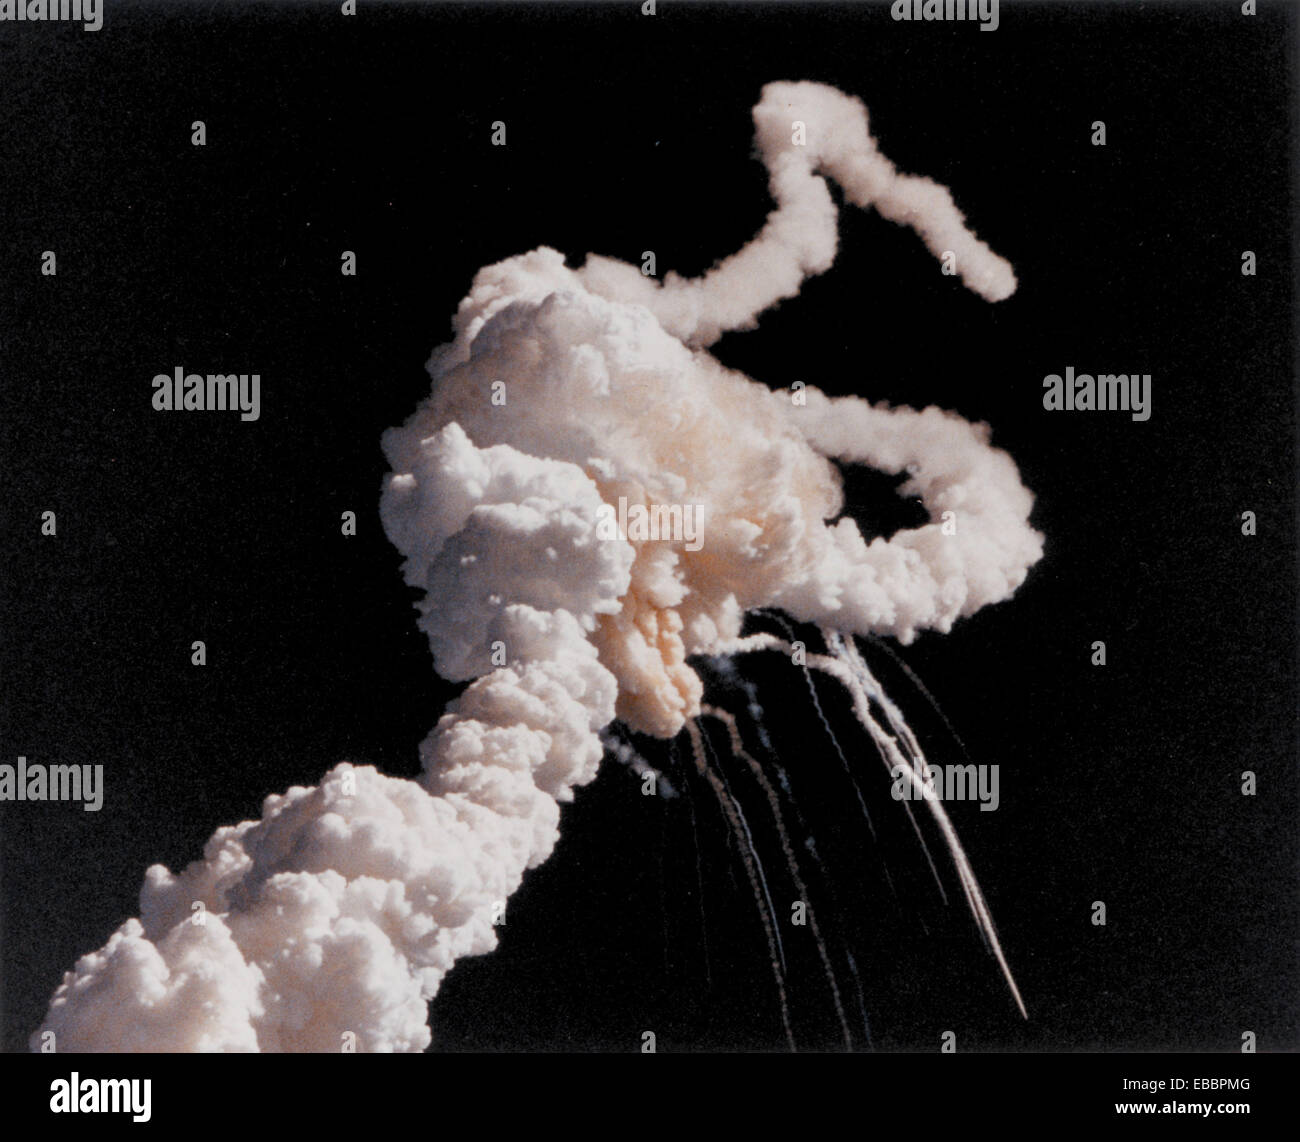 STS-51-L Challenger space shuttle accident exhaust explosion. On January 28, 1986, the Space Shuttle Challenger and her Stock Photo